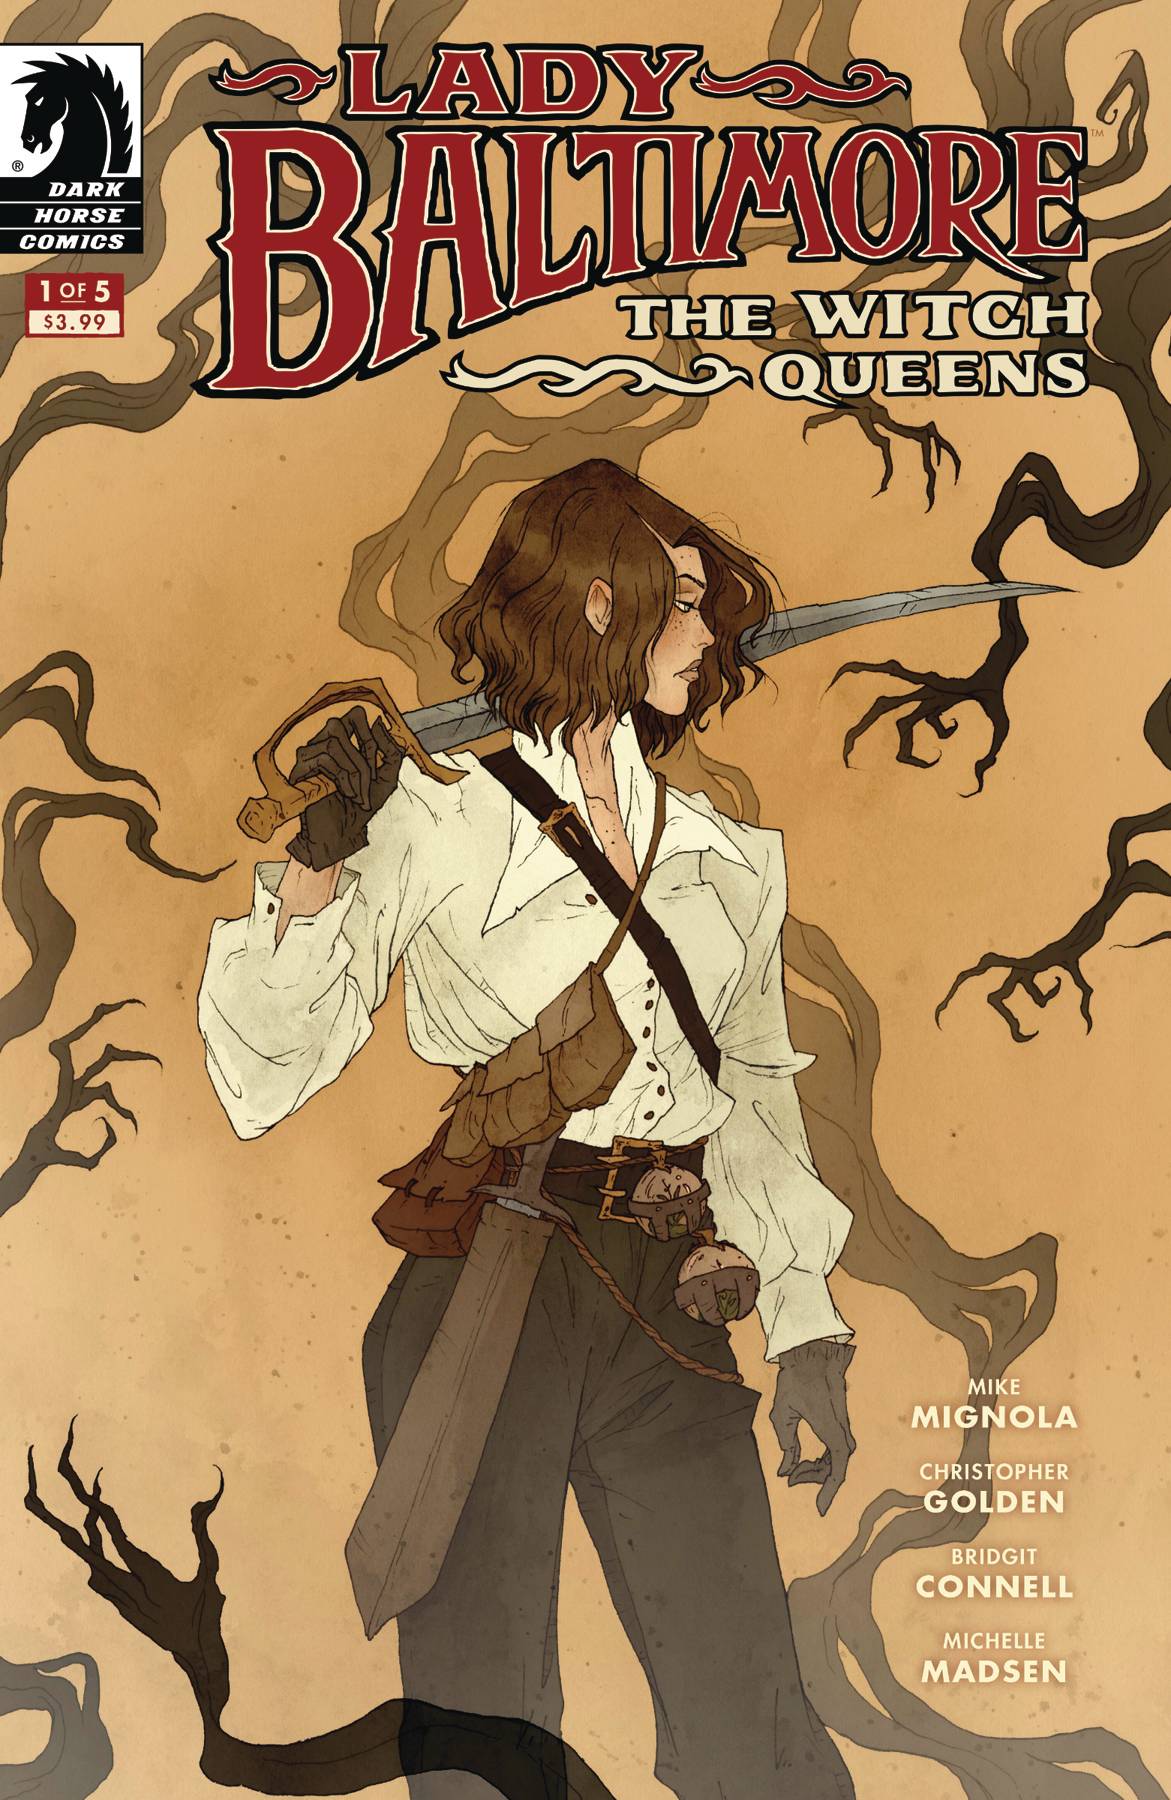 LADY BALTIMORE WITCH QUEENS #1 (OF 5) (RES)